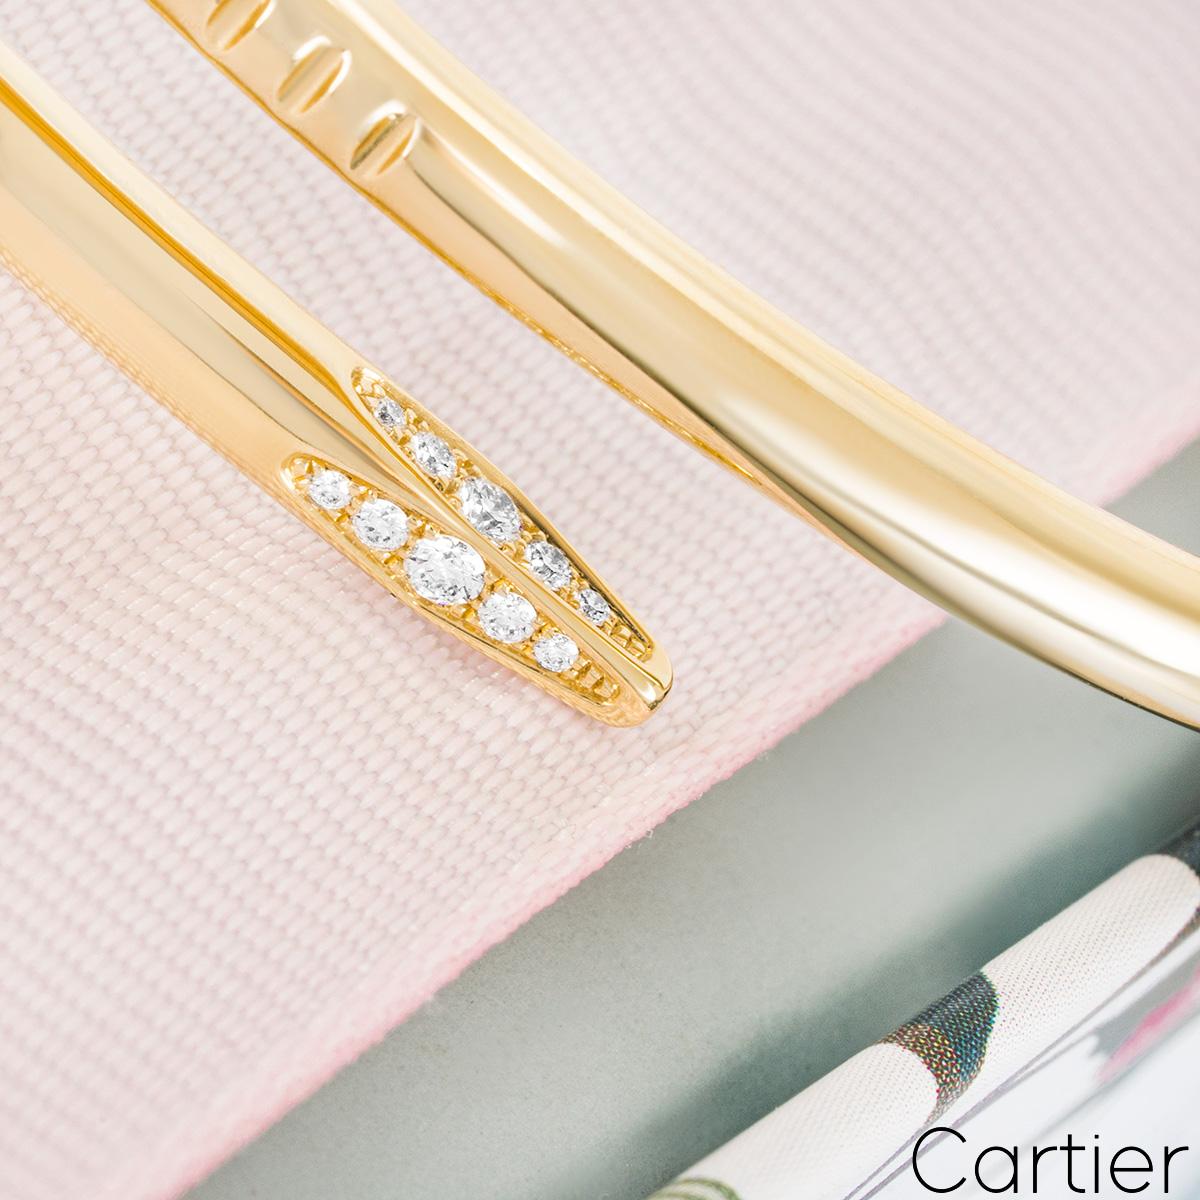 Cartier Yellow Gold Diamond Juste Un Clou Bracelet Size 16 B6048616 In Excellent Condition For Sale In London, GB